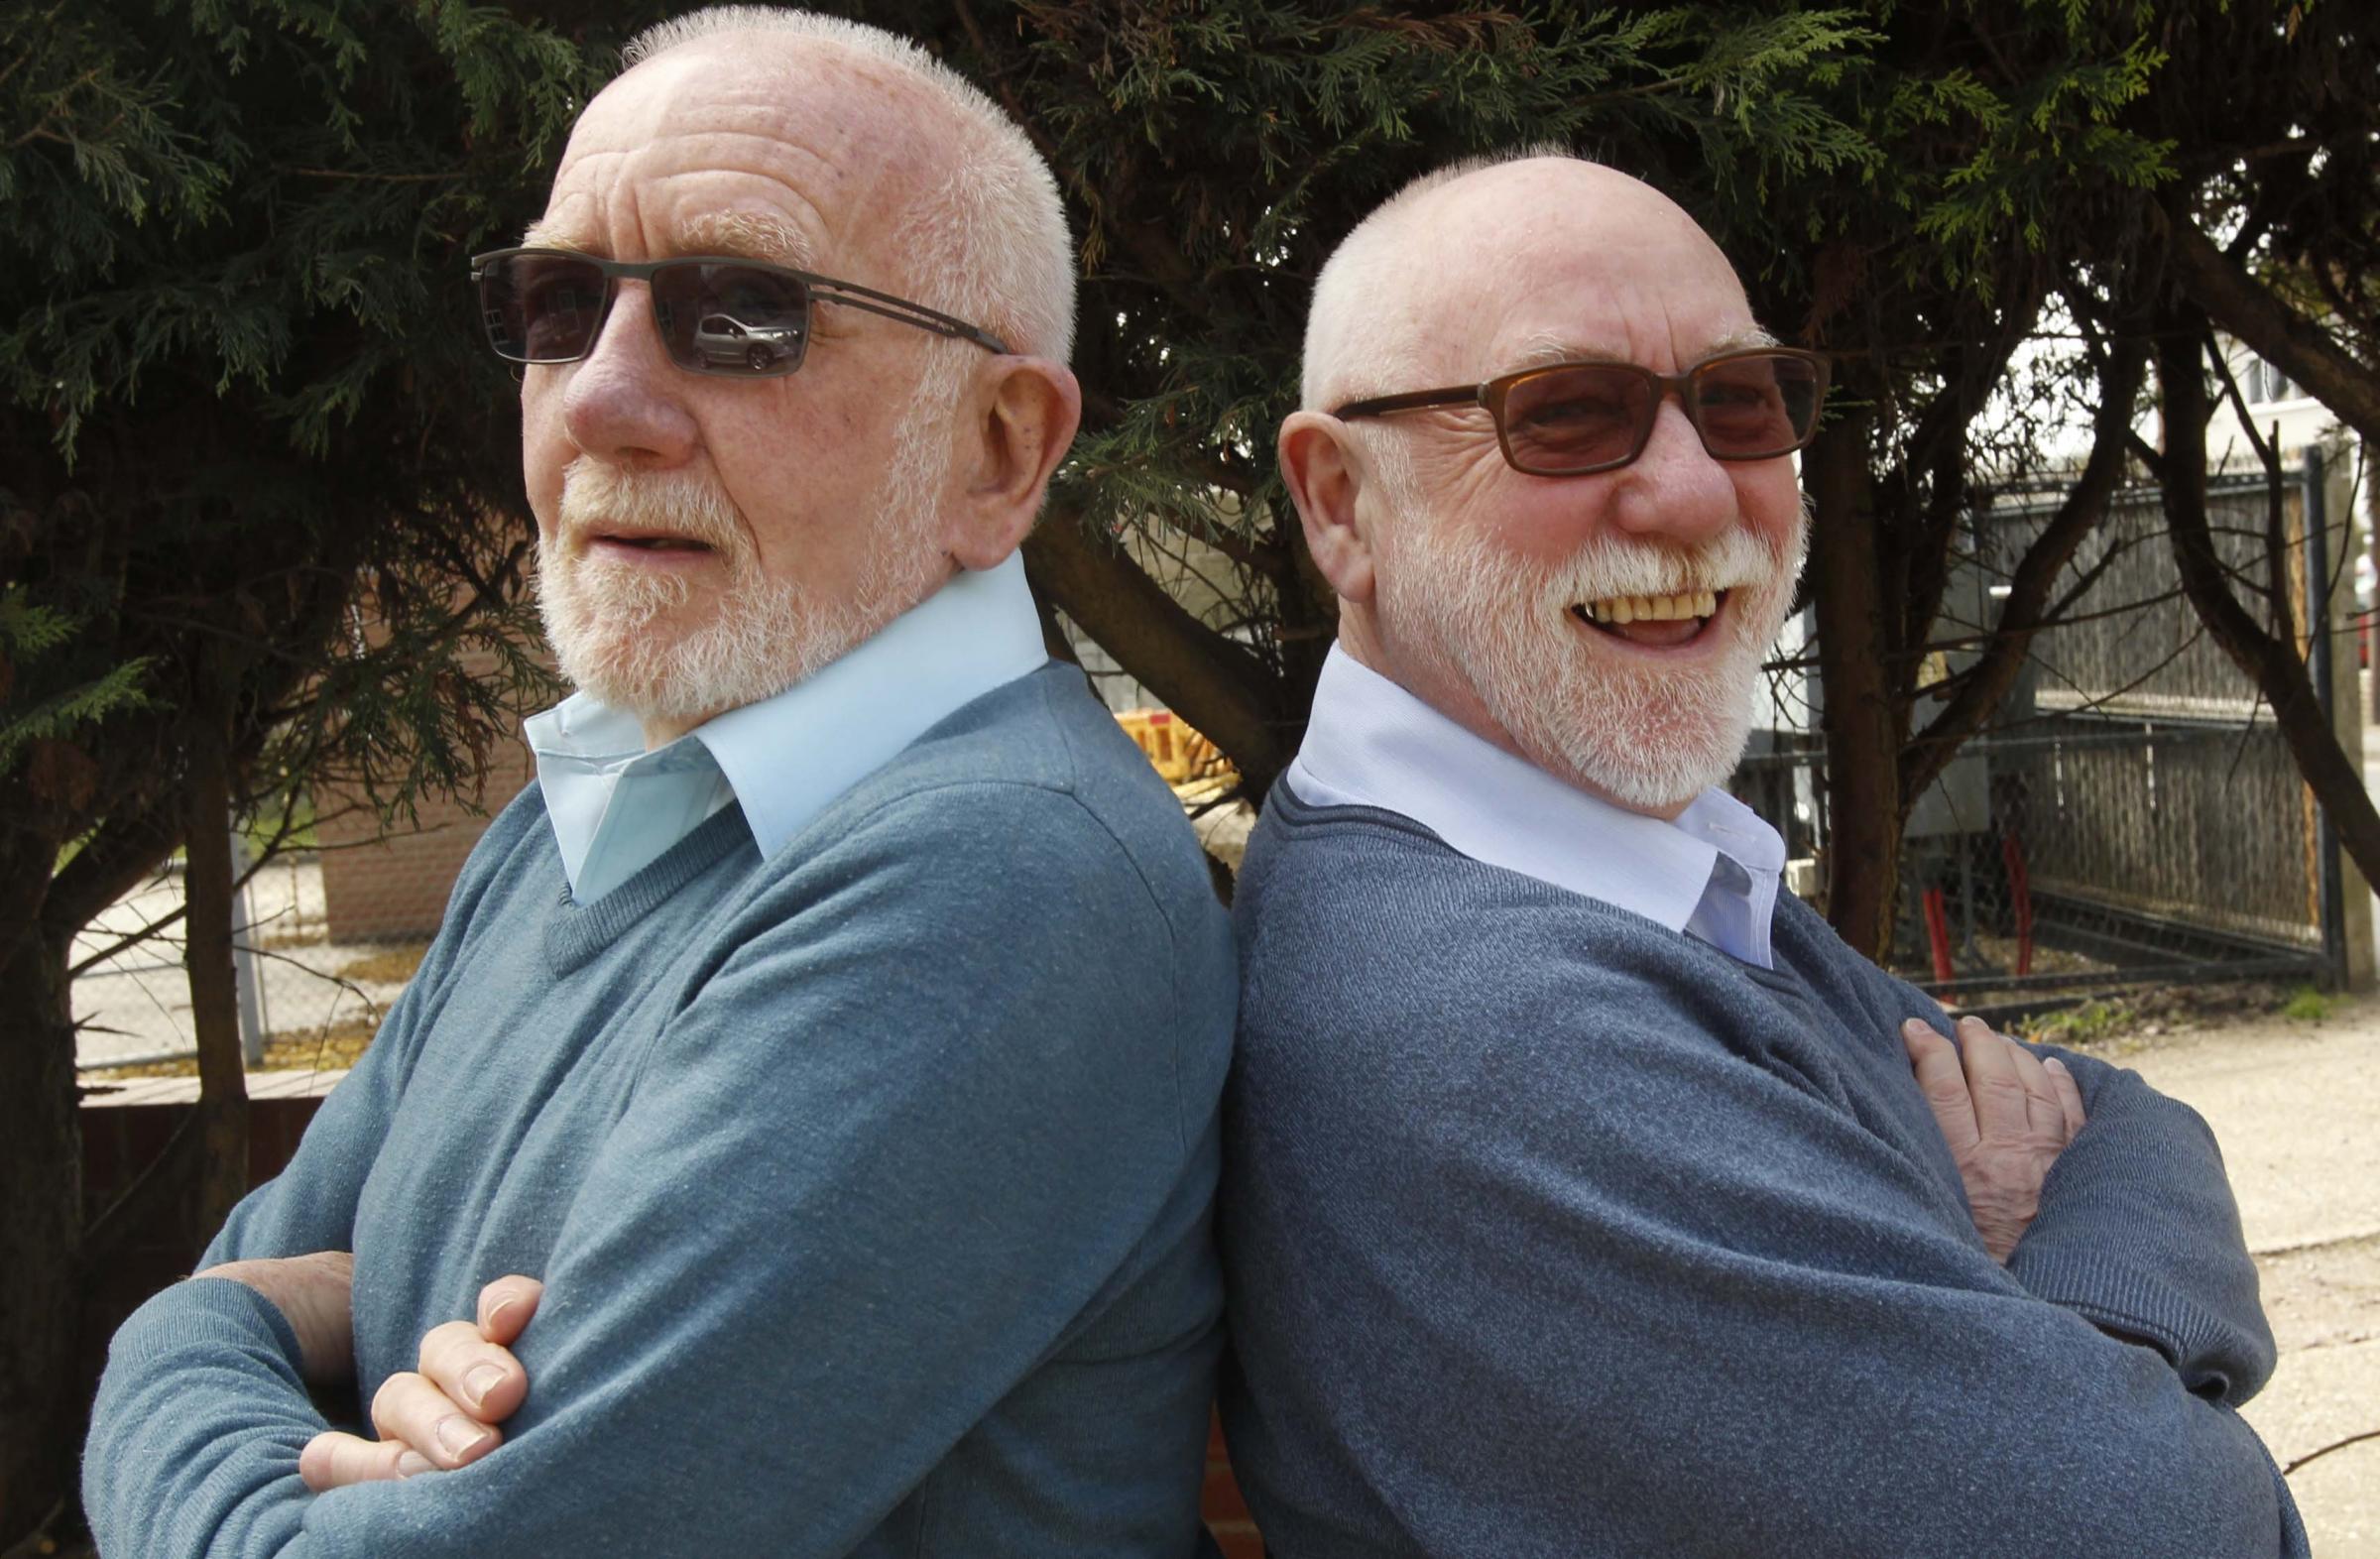 Doppelgangers win national competition for most convincing lookalikes in the UK